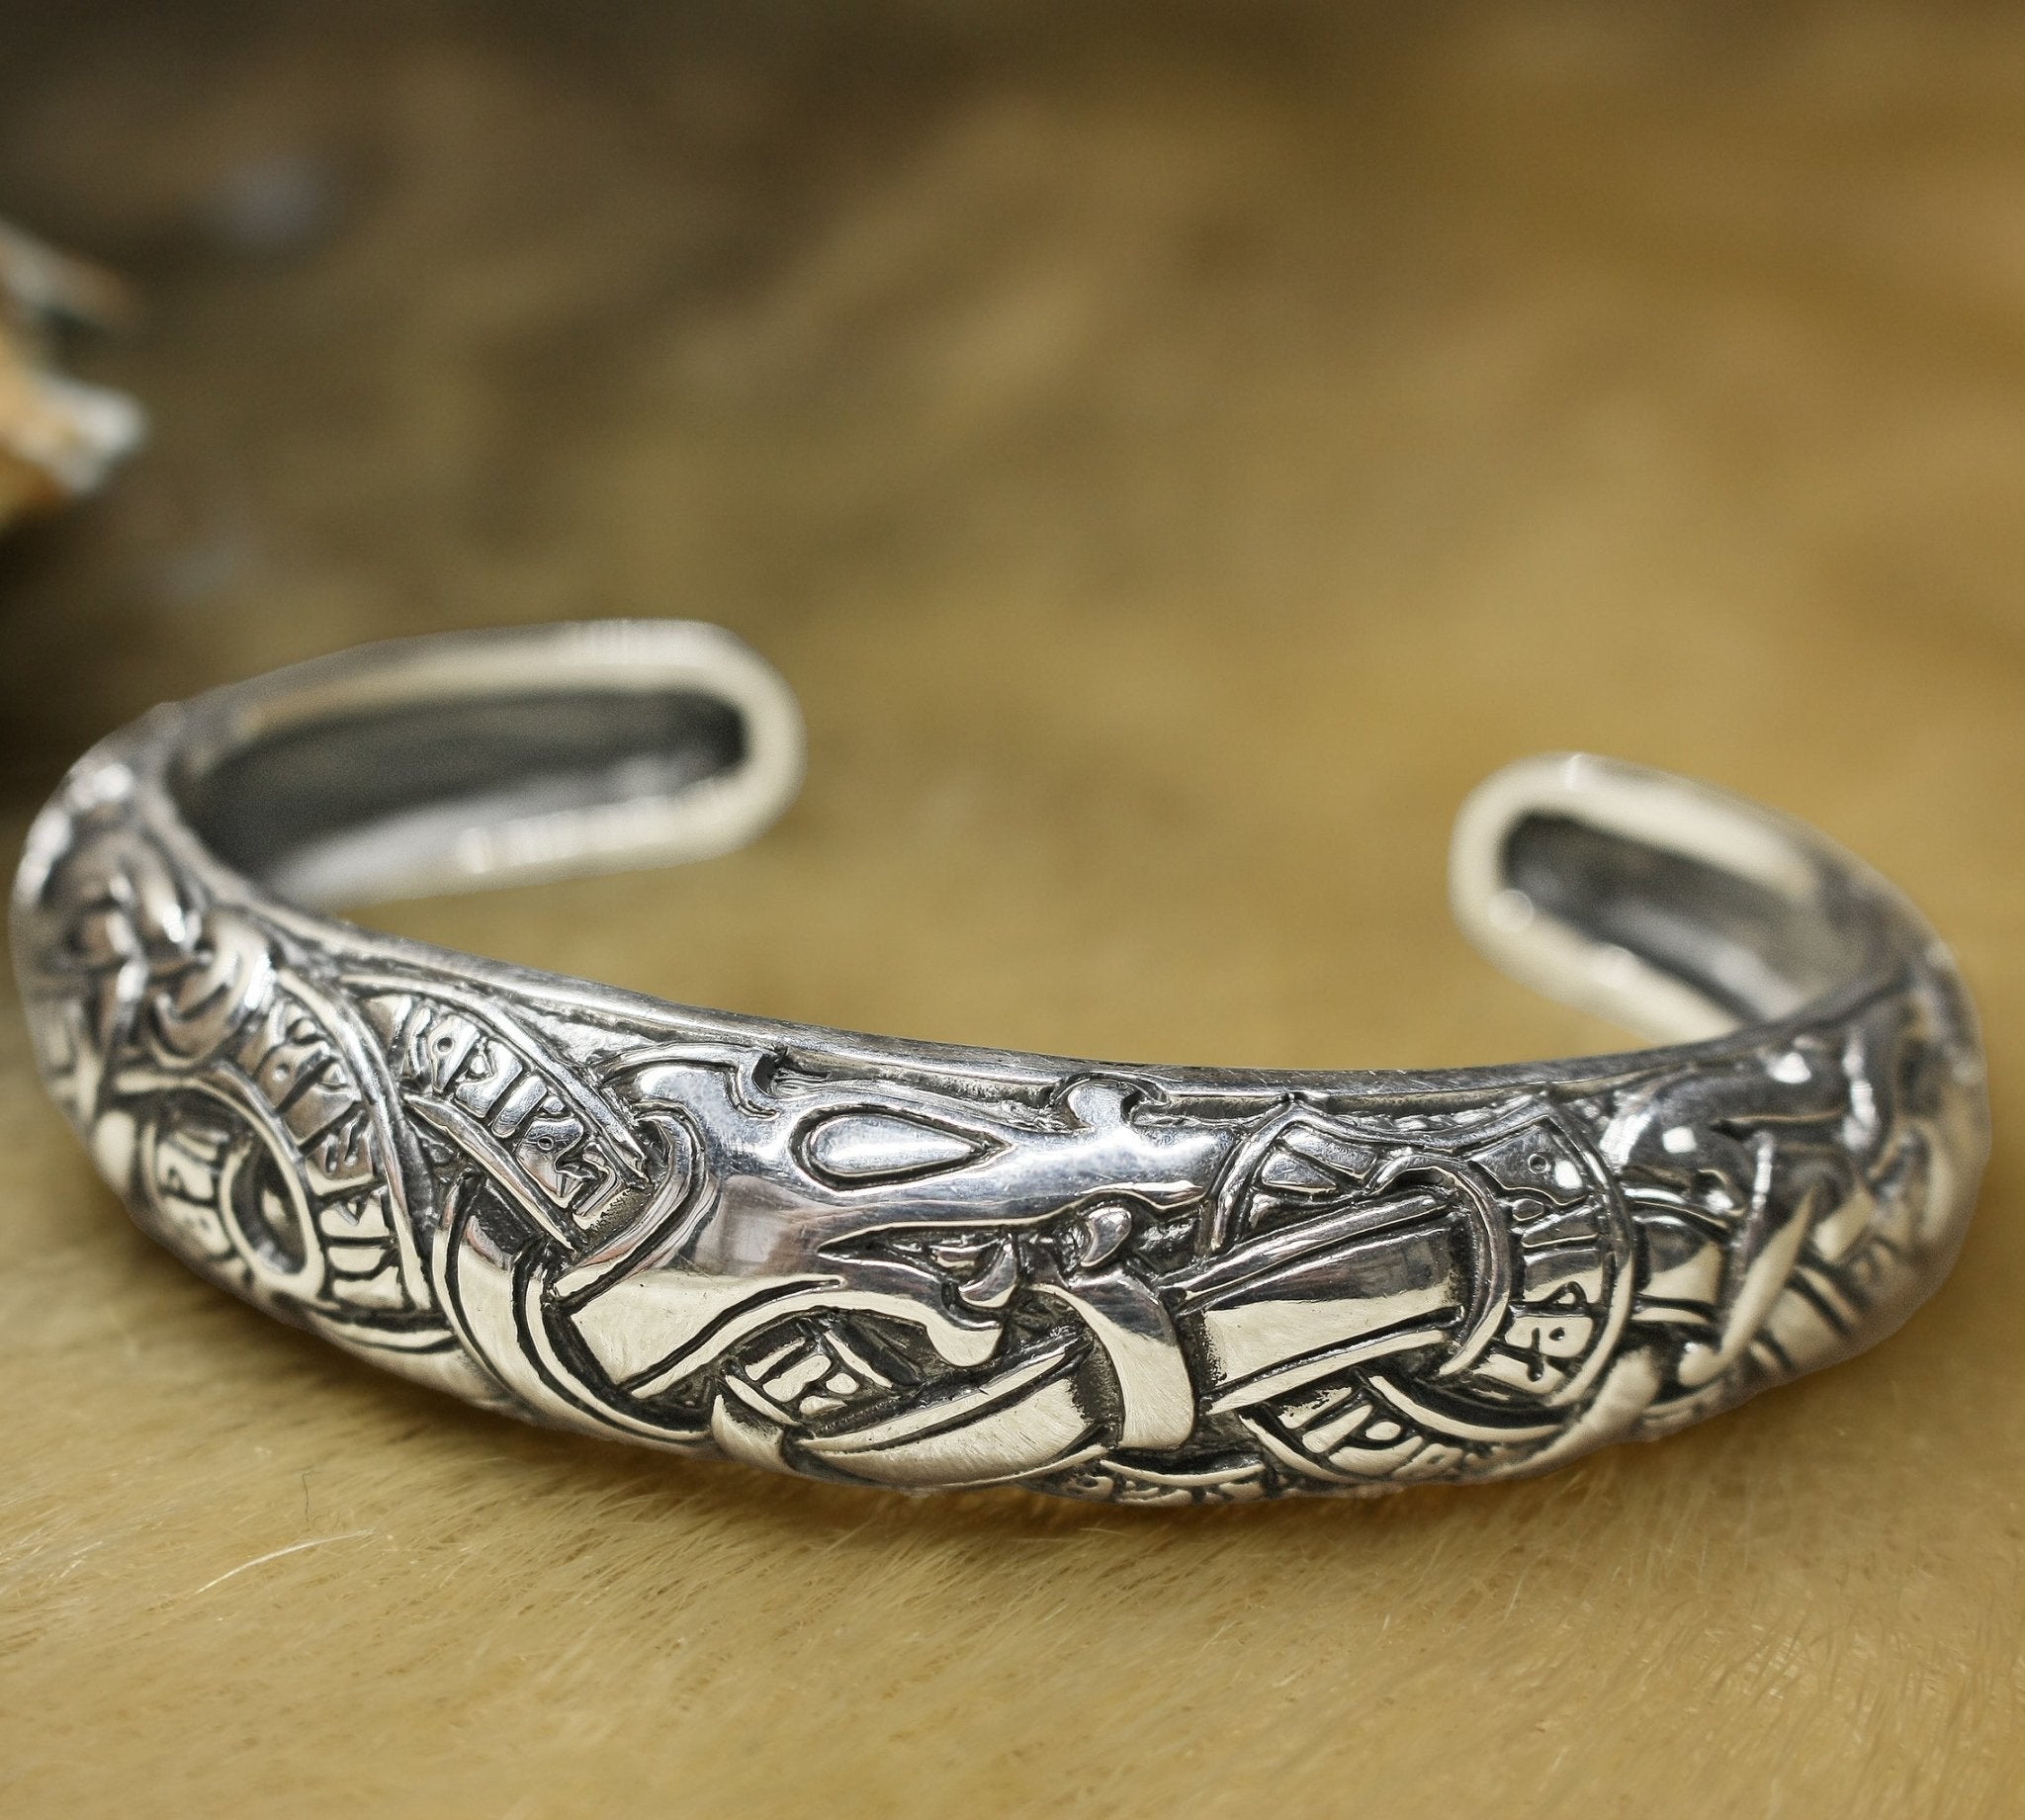 Buy TURTLEDOVE Viking Bracelet Celtic Fox - Nordic Bracelet with Triquetra  Trinity Knot - Pagan Jewelry of Talisman at Amazon.in